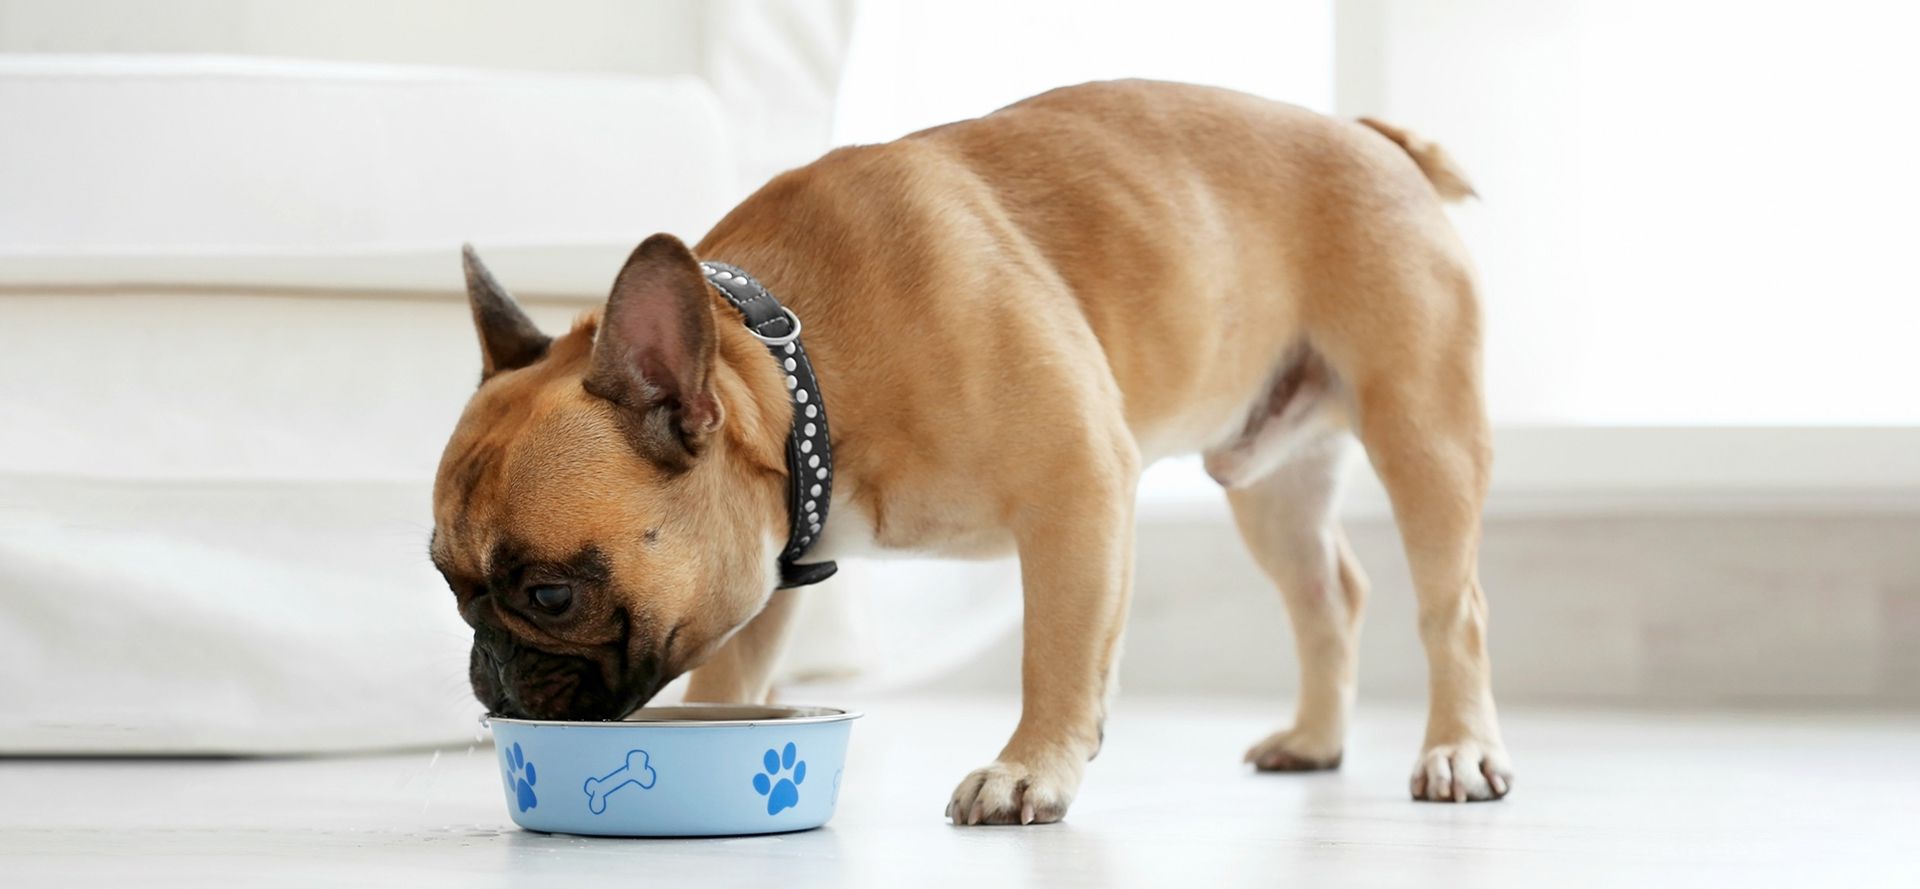 French bulldog eats from a blue bowl.